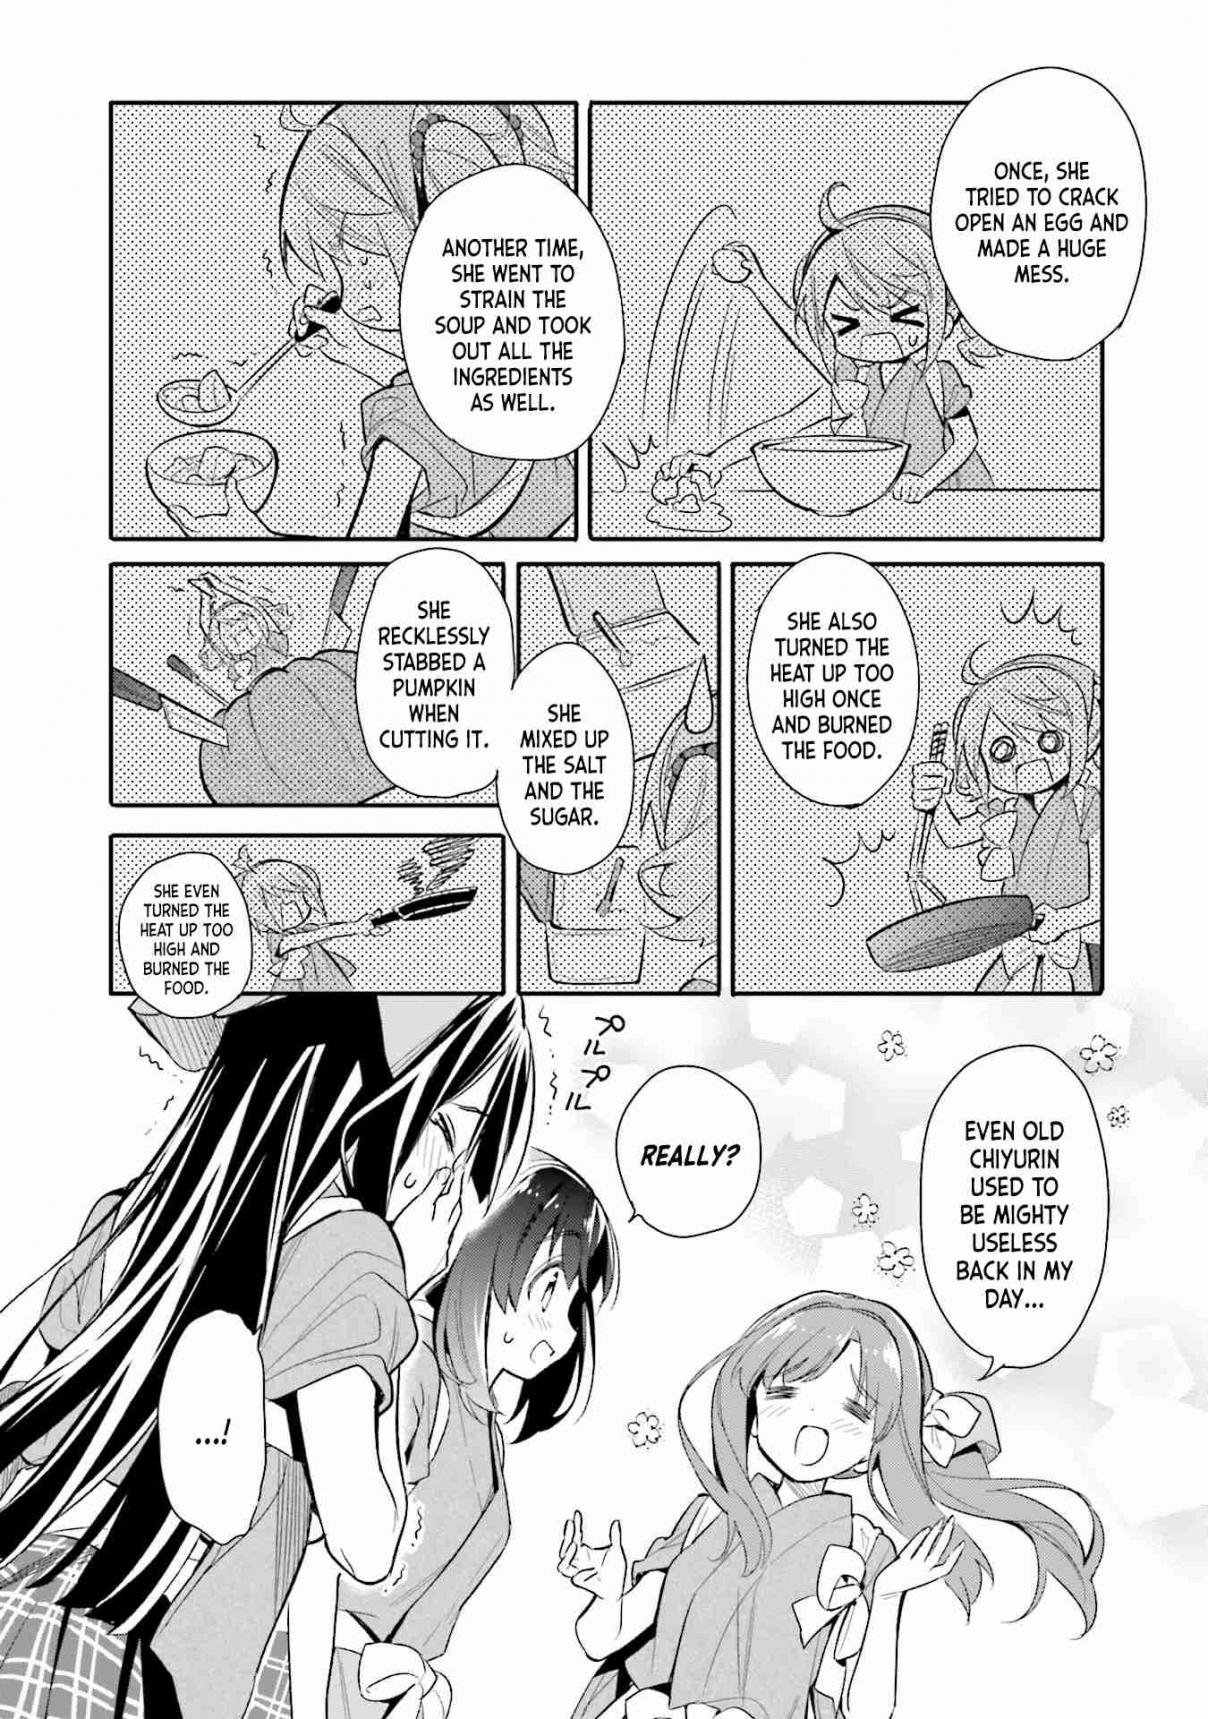 Chotto Ippai! Vol. 2 Ch. 10 Something we can do together